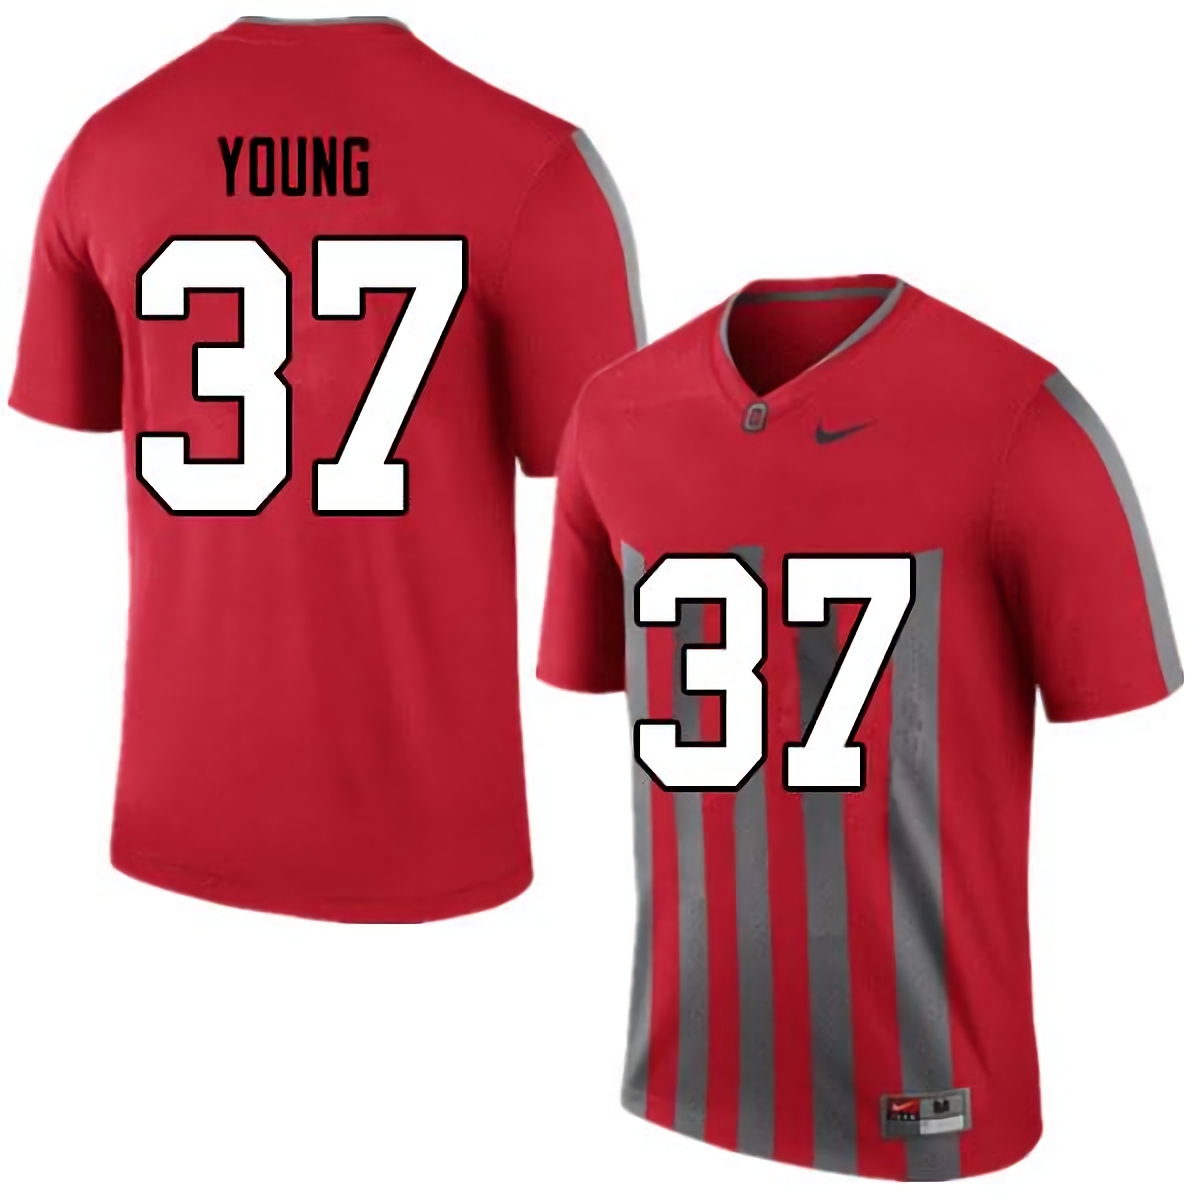 Craig Young Ohio State Buckeyes Men's NCAA #37 Nike Retro College Stitched Football Jersey VKP6656OQ